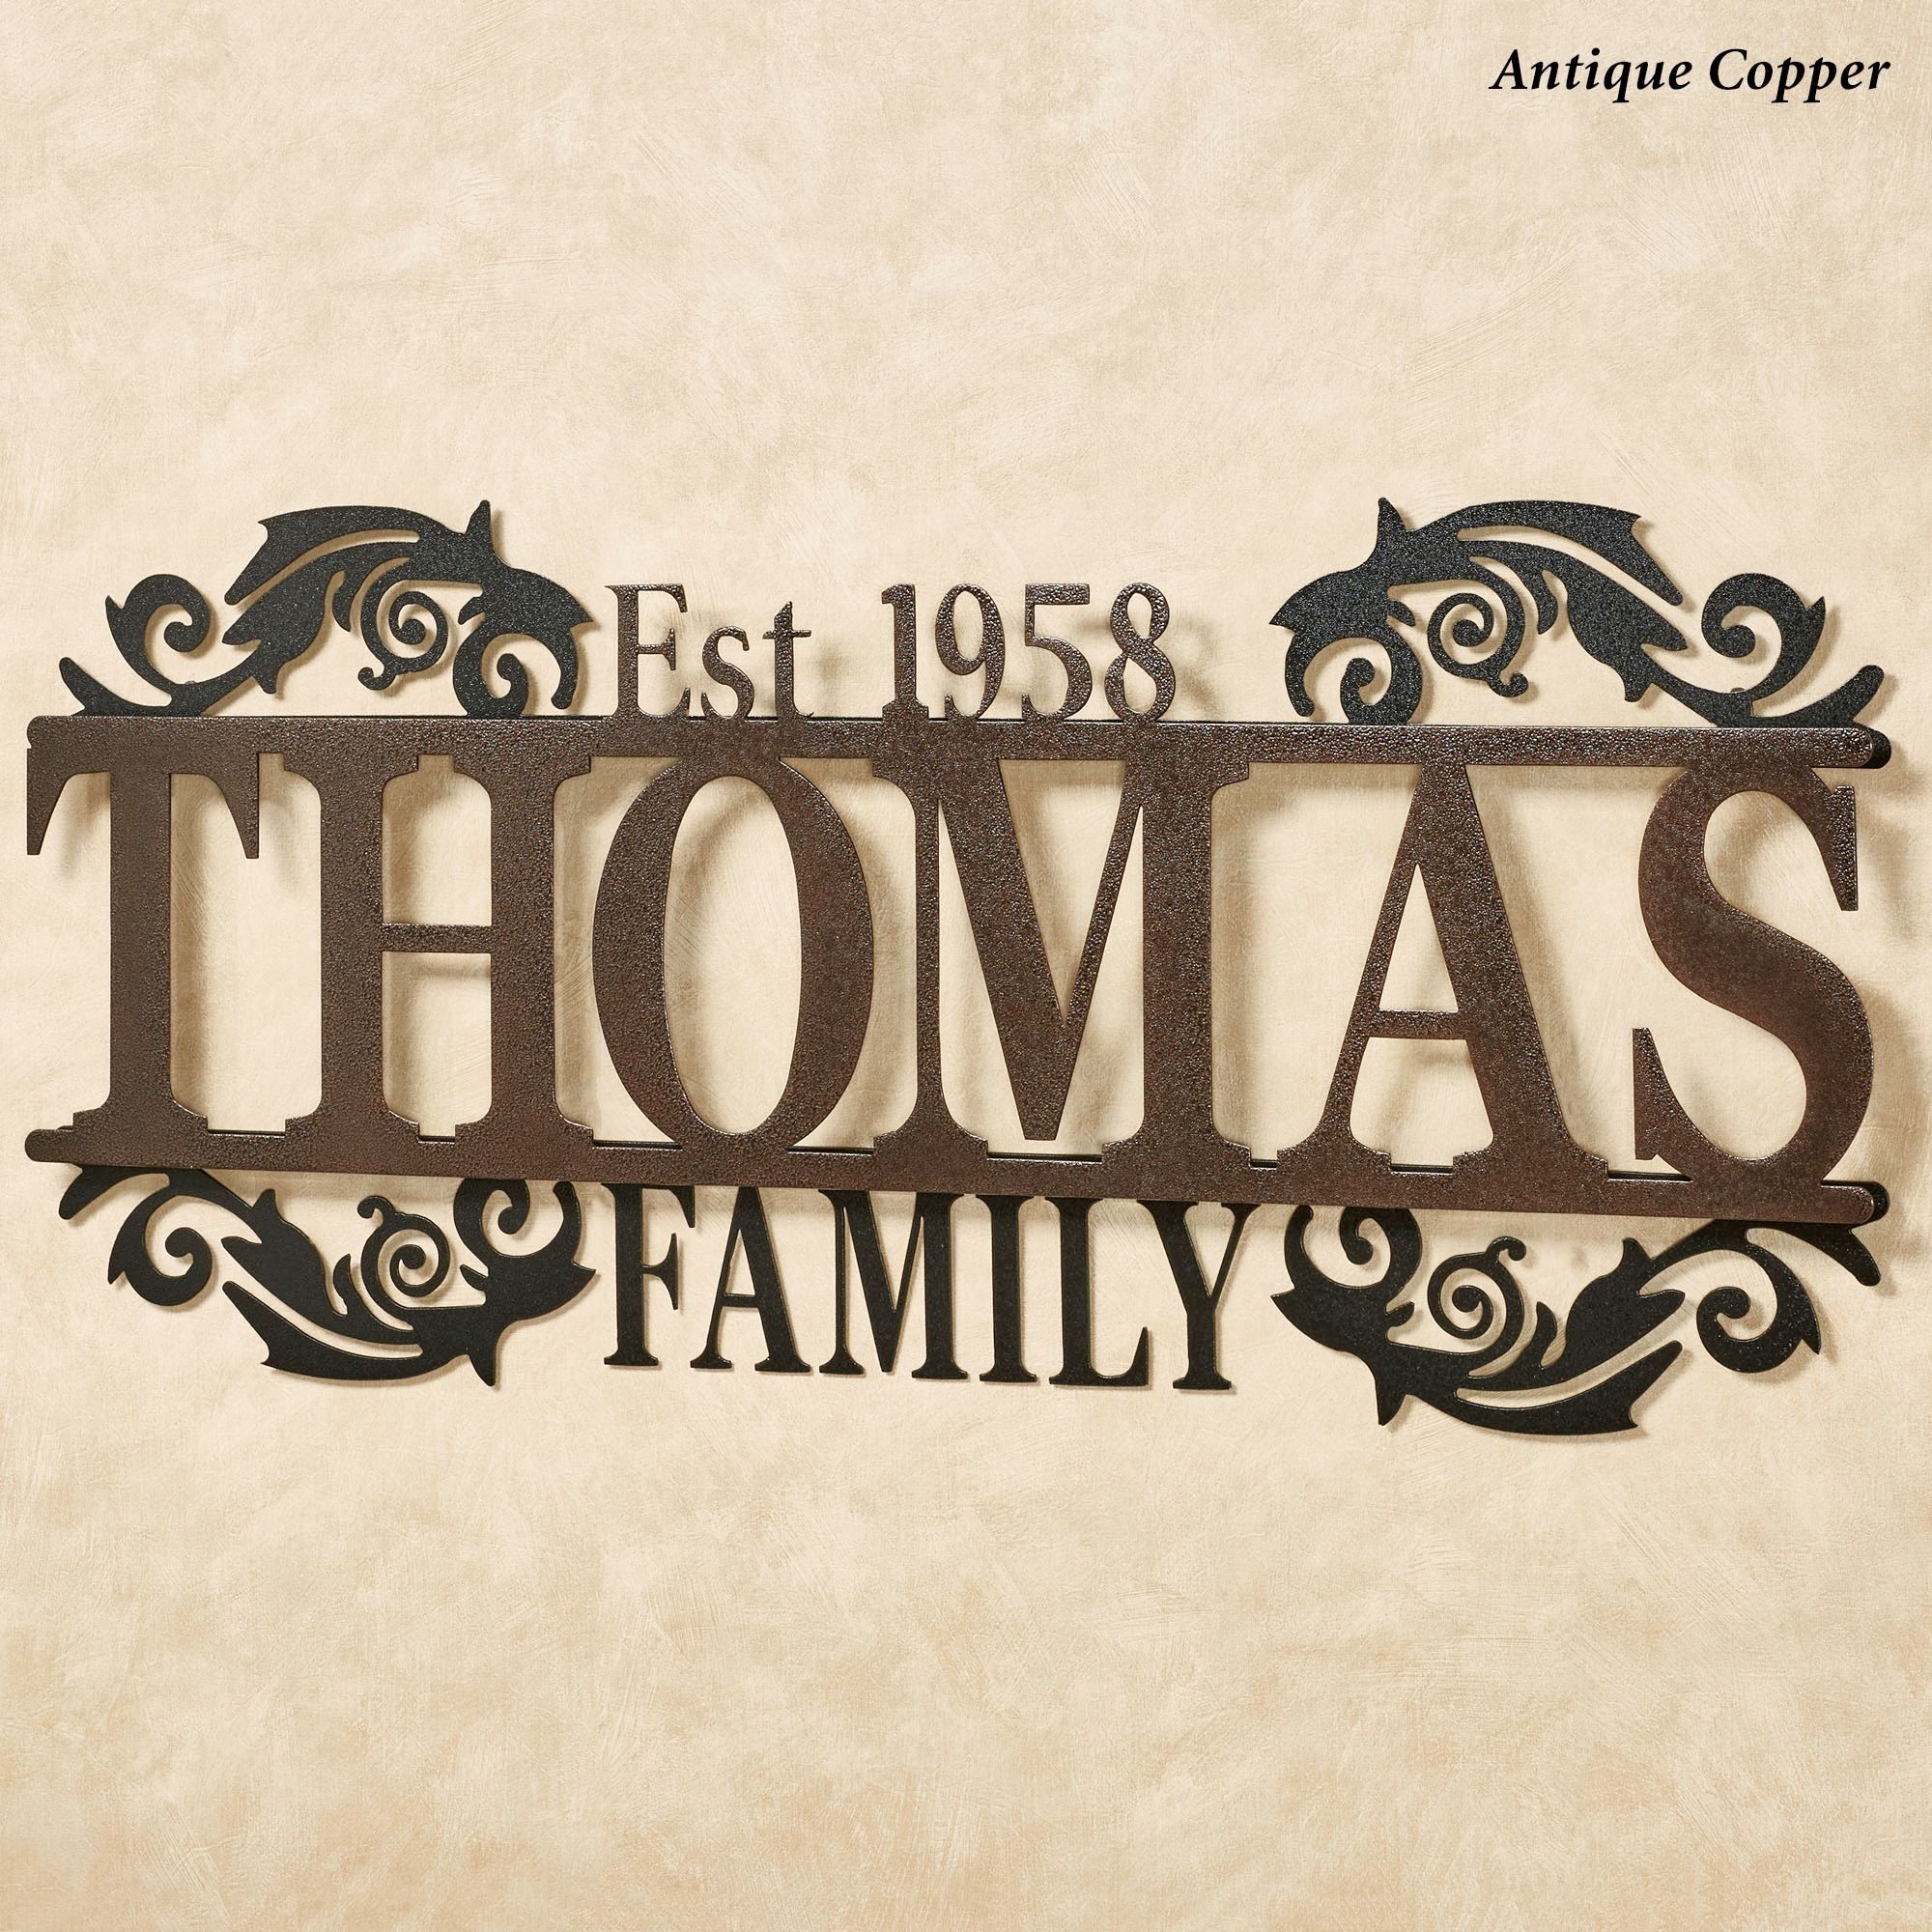 Legacy Family Established Year Personalized Metal Wall Art Sign Intended For Personalized Metal Wall Art (View 8 of 20)